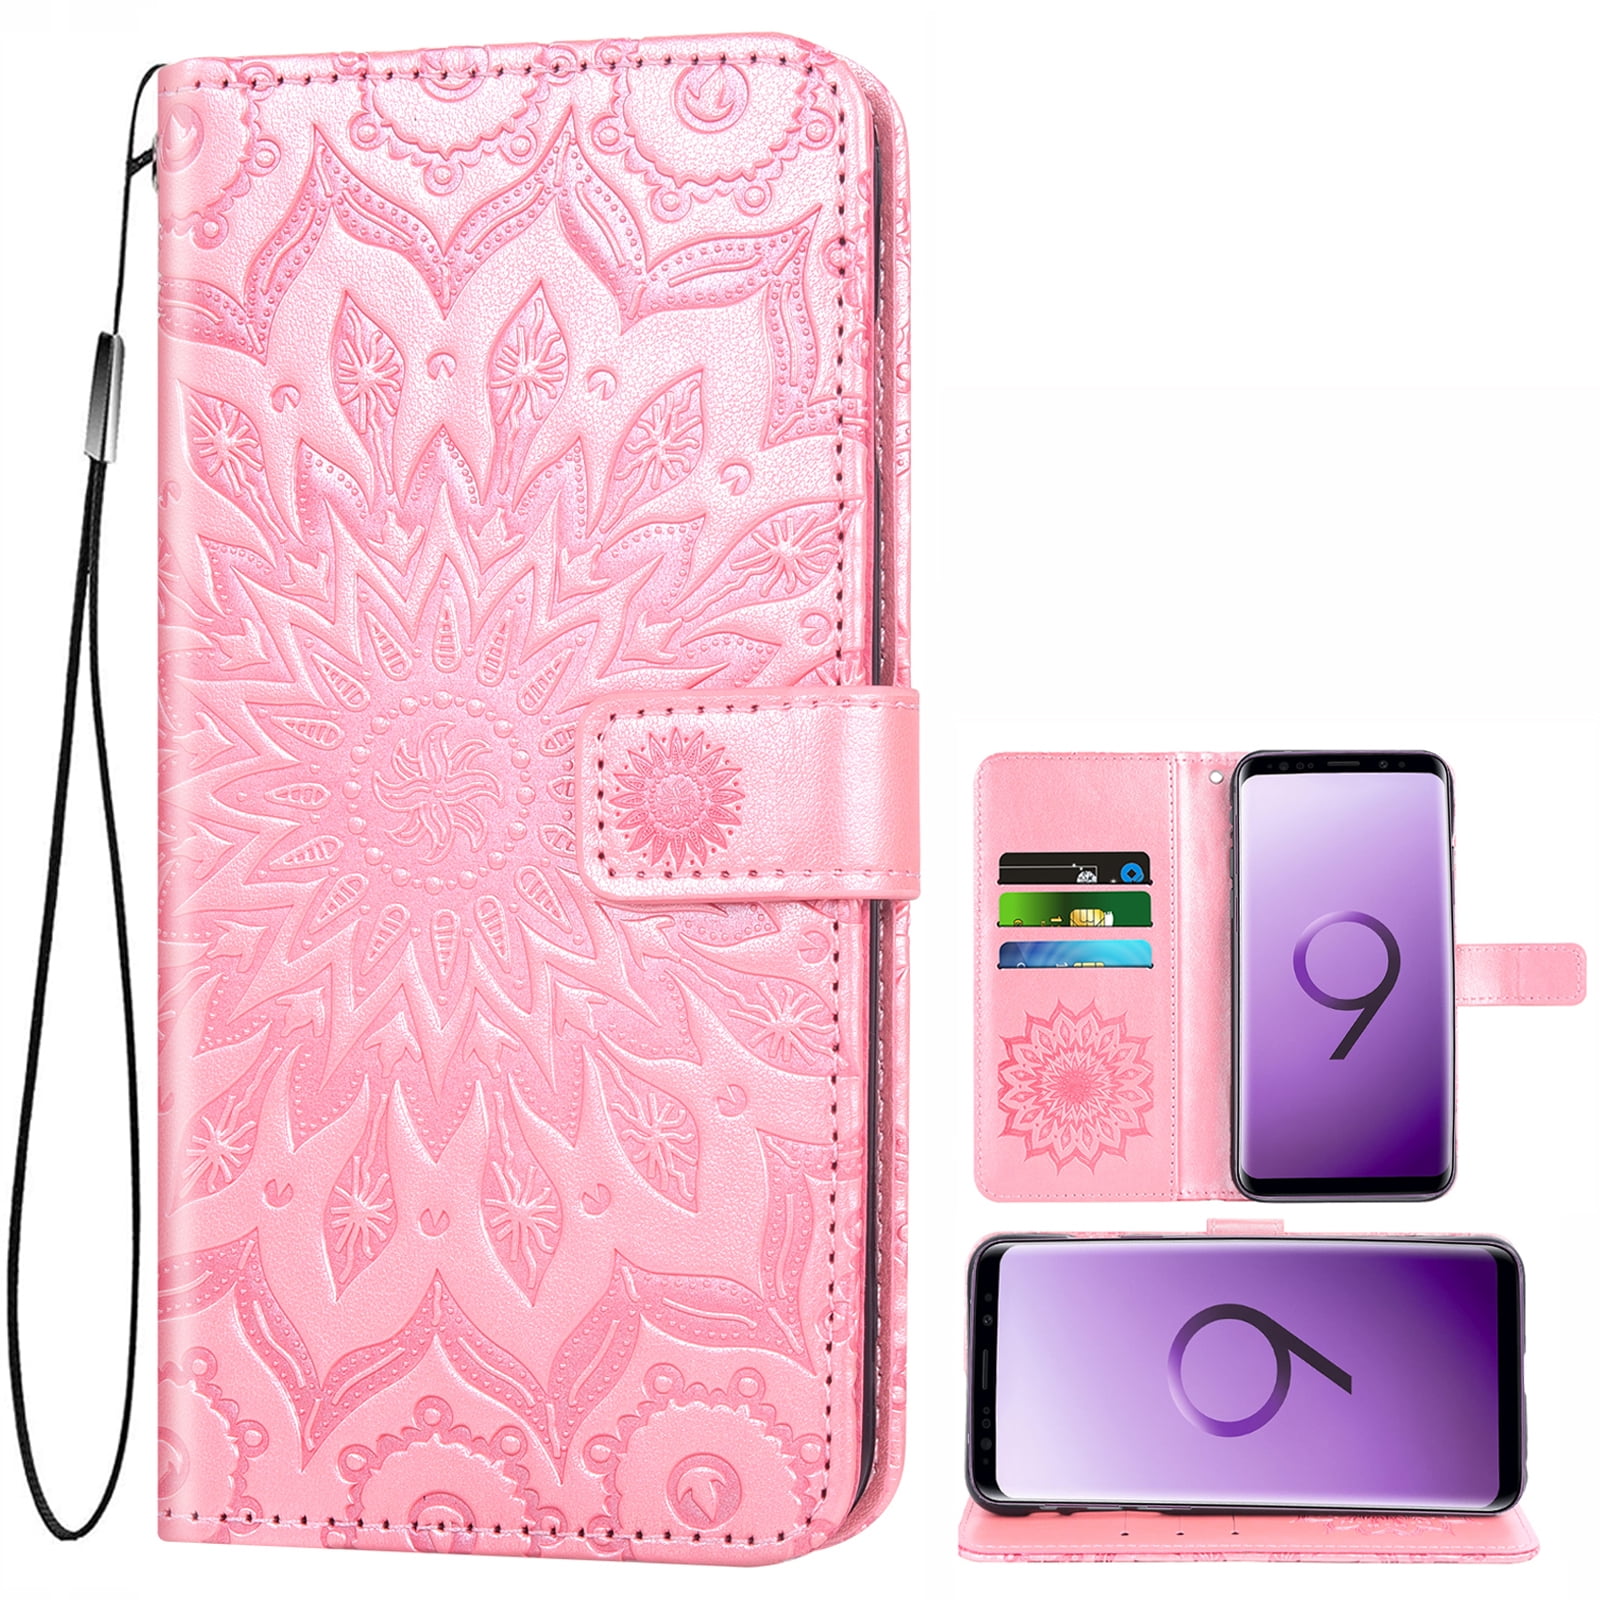 Purple Card Holders Kickstand Extra-Durable Wallet Case for Samsung Galaxy S9 PU Leather Flip Cover Compatible with Samsung Galaxy S9 